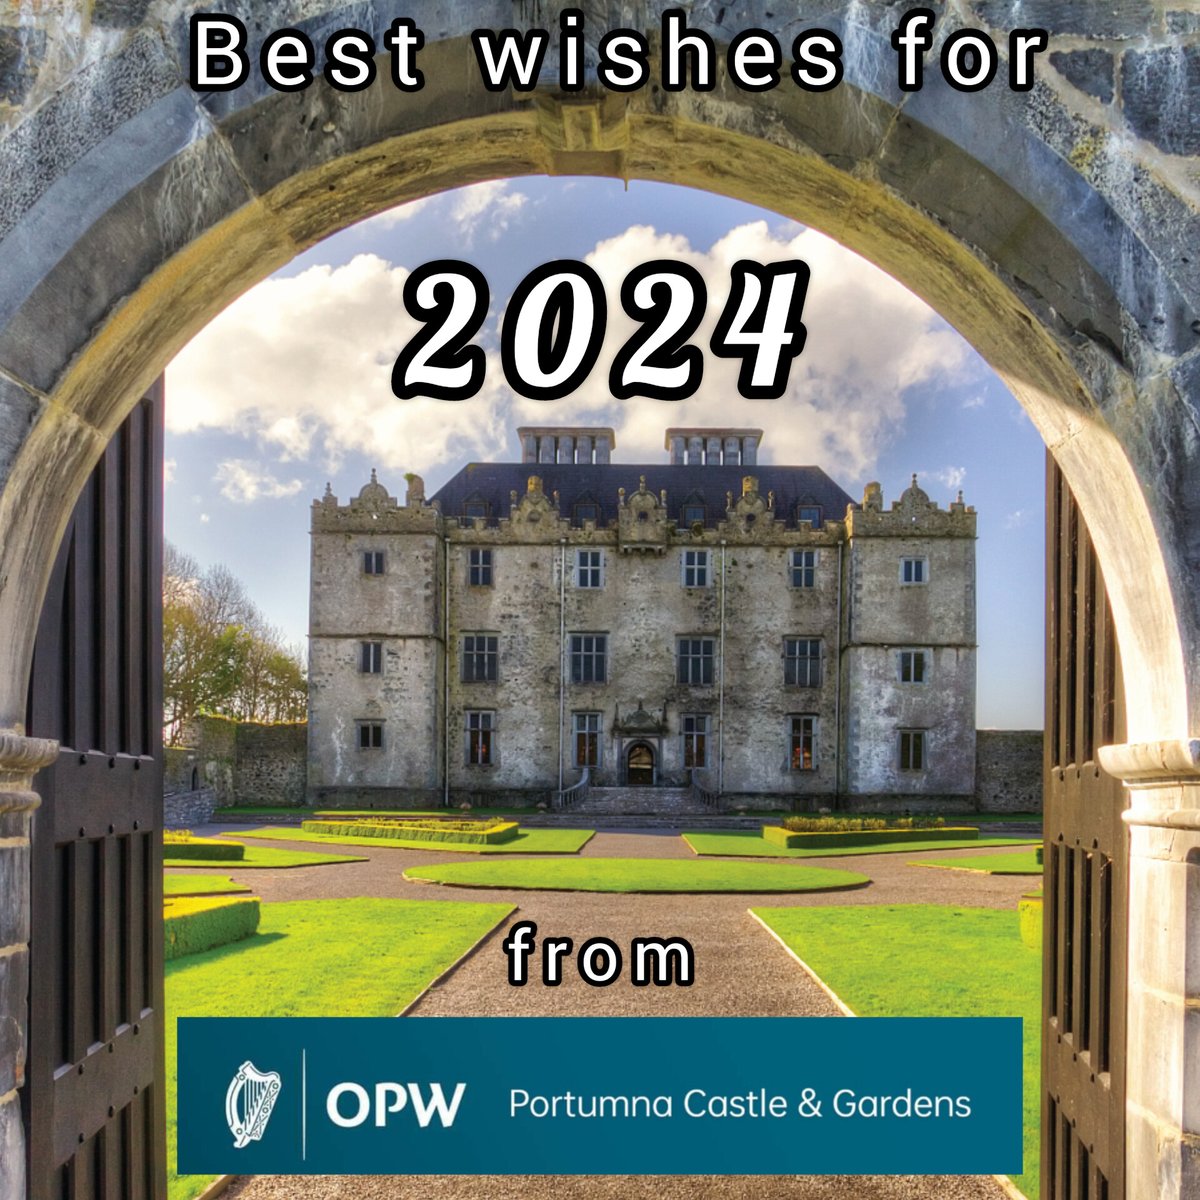 We would like to take this opportunity to wish everyone a Happy New Year for 2024 with health and happiness.  We are looking forward to seeing you all in March.

#newyear #2024 #happynewyear #happynewyear2024 #portumnacastle #portumna #opw #heritageireland #visitportumna